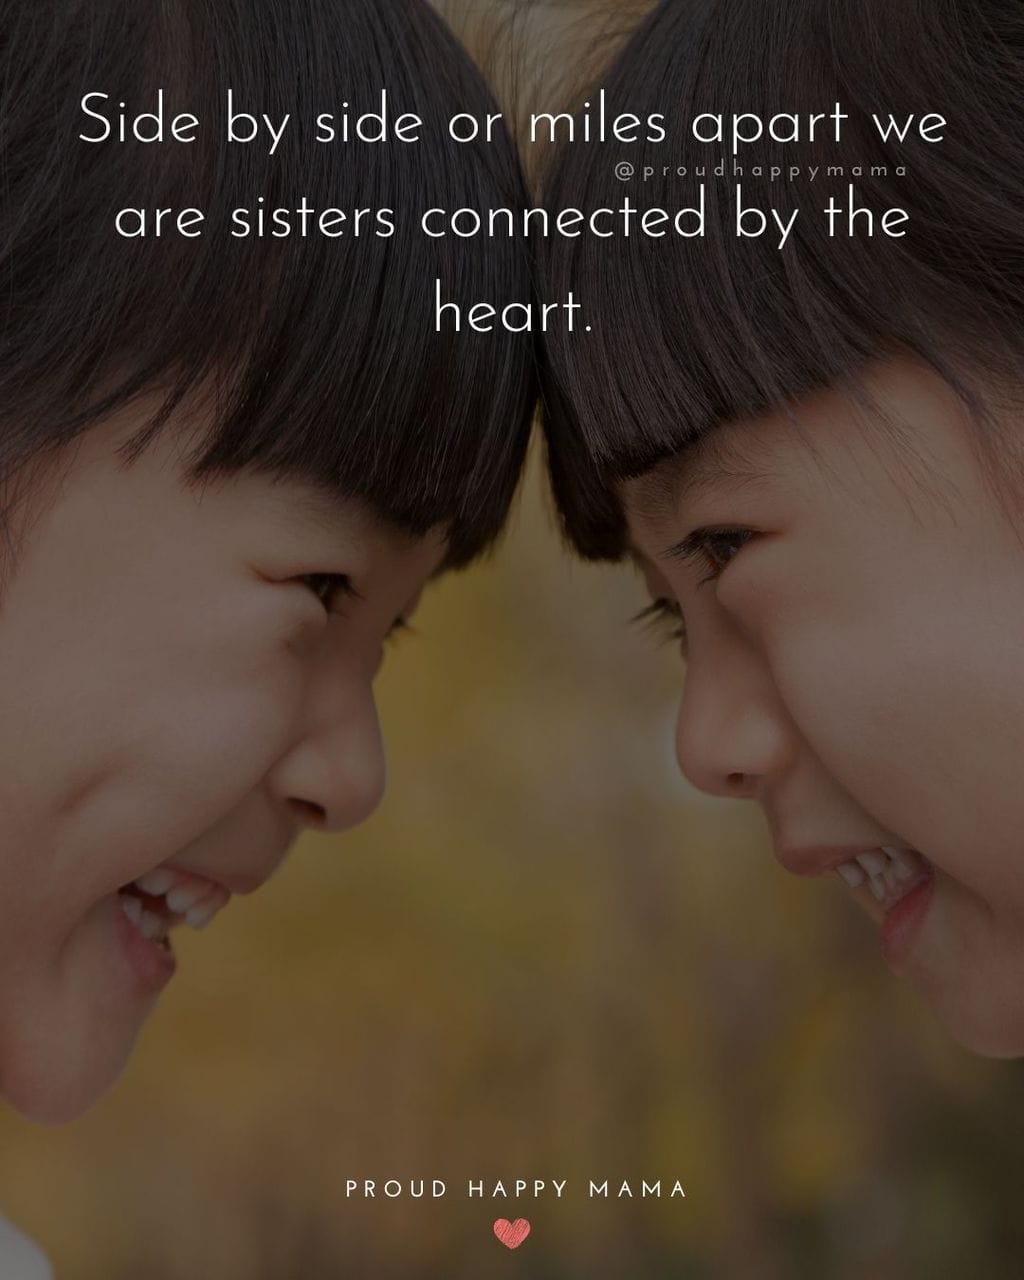 Sister Quotes - Side by side or miles apart we are sisters connected by the heart.